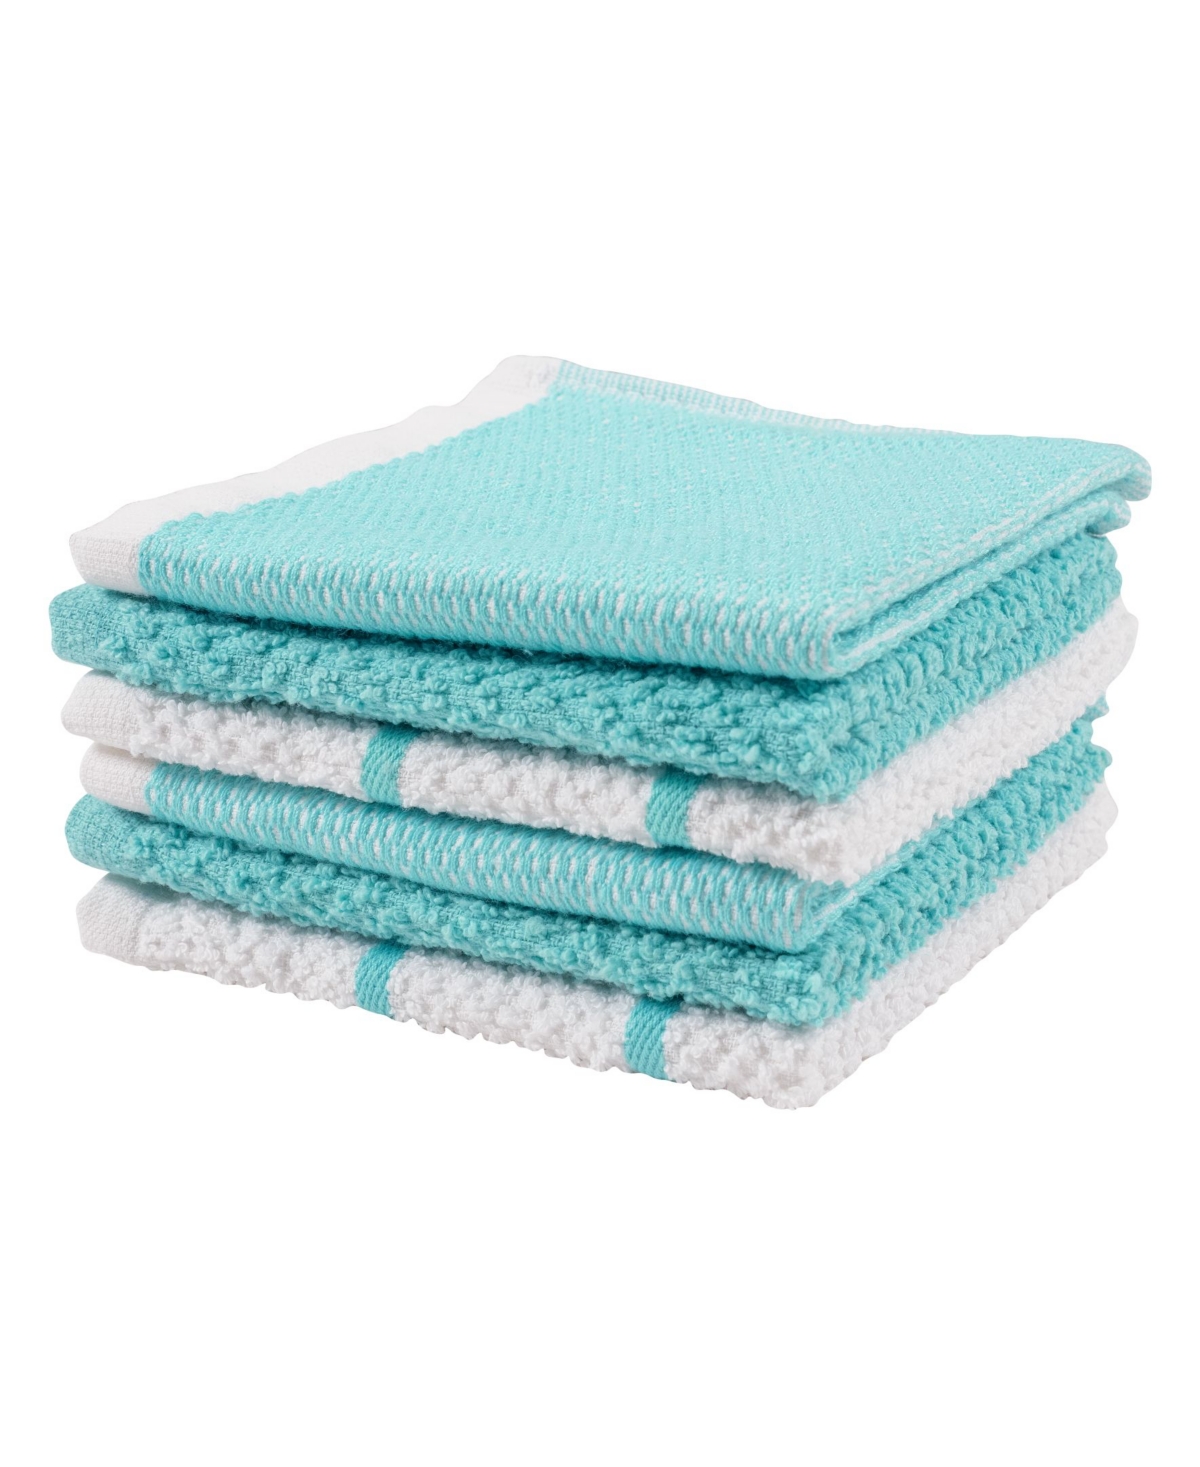 Ayesha Curry Terry Dishcloth, Set of 6 - Open Green